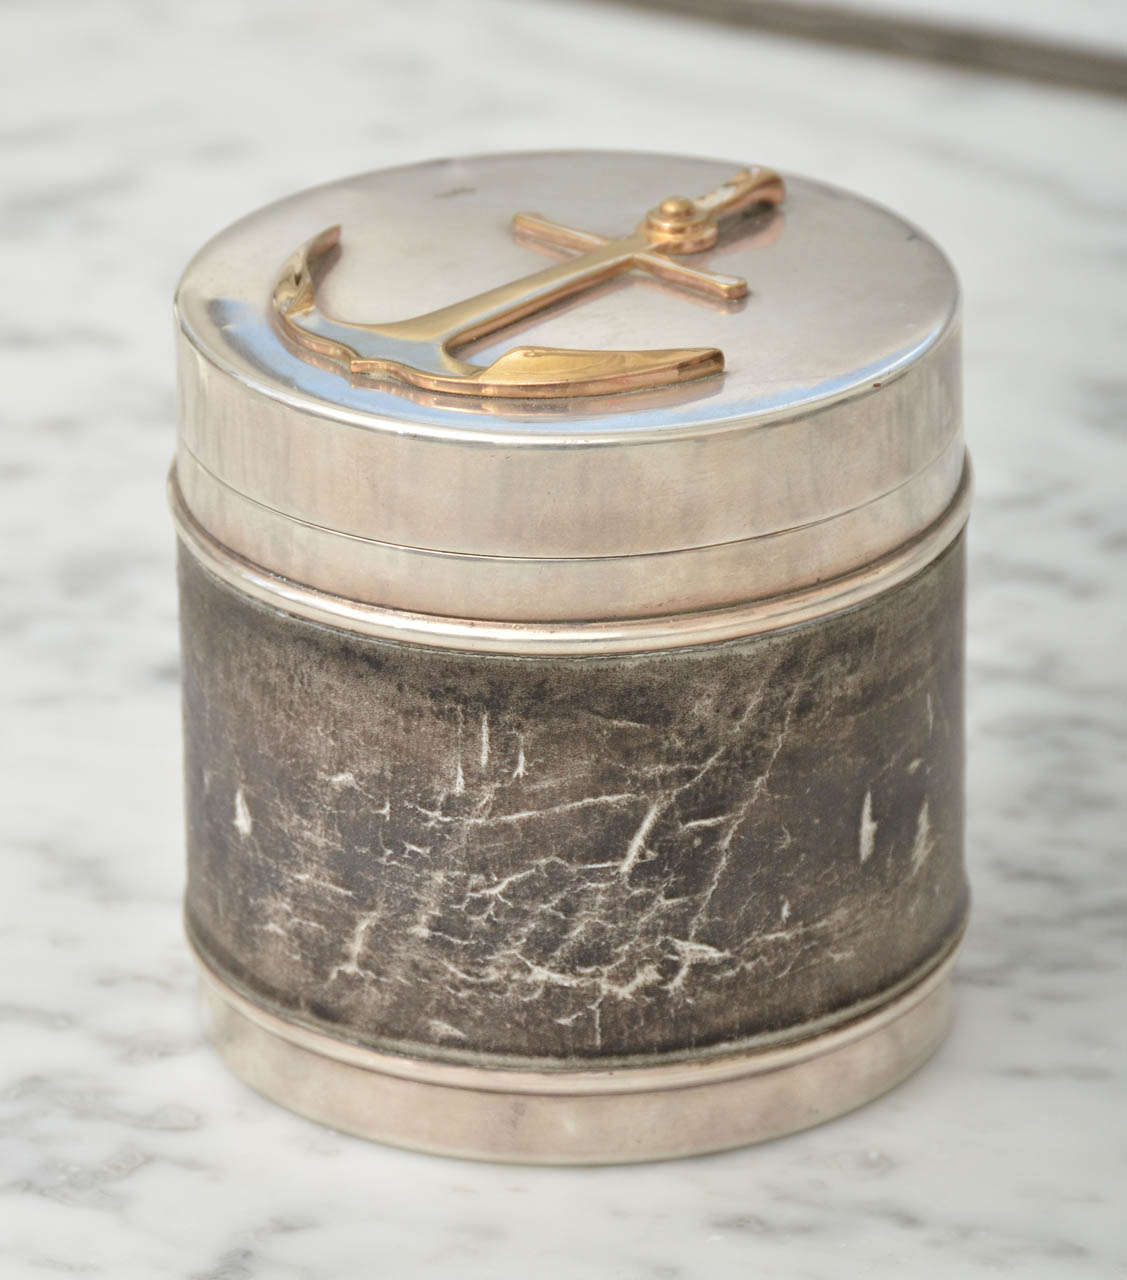 Stunning 1950's Hermes Round Leather and Silver Plate Box with Brass Anchor Detail. Originally used as a cigarette box, the brass insert is removable.